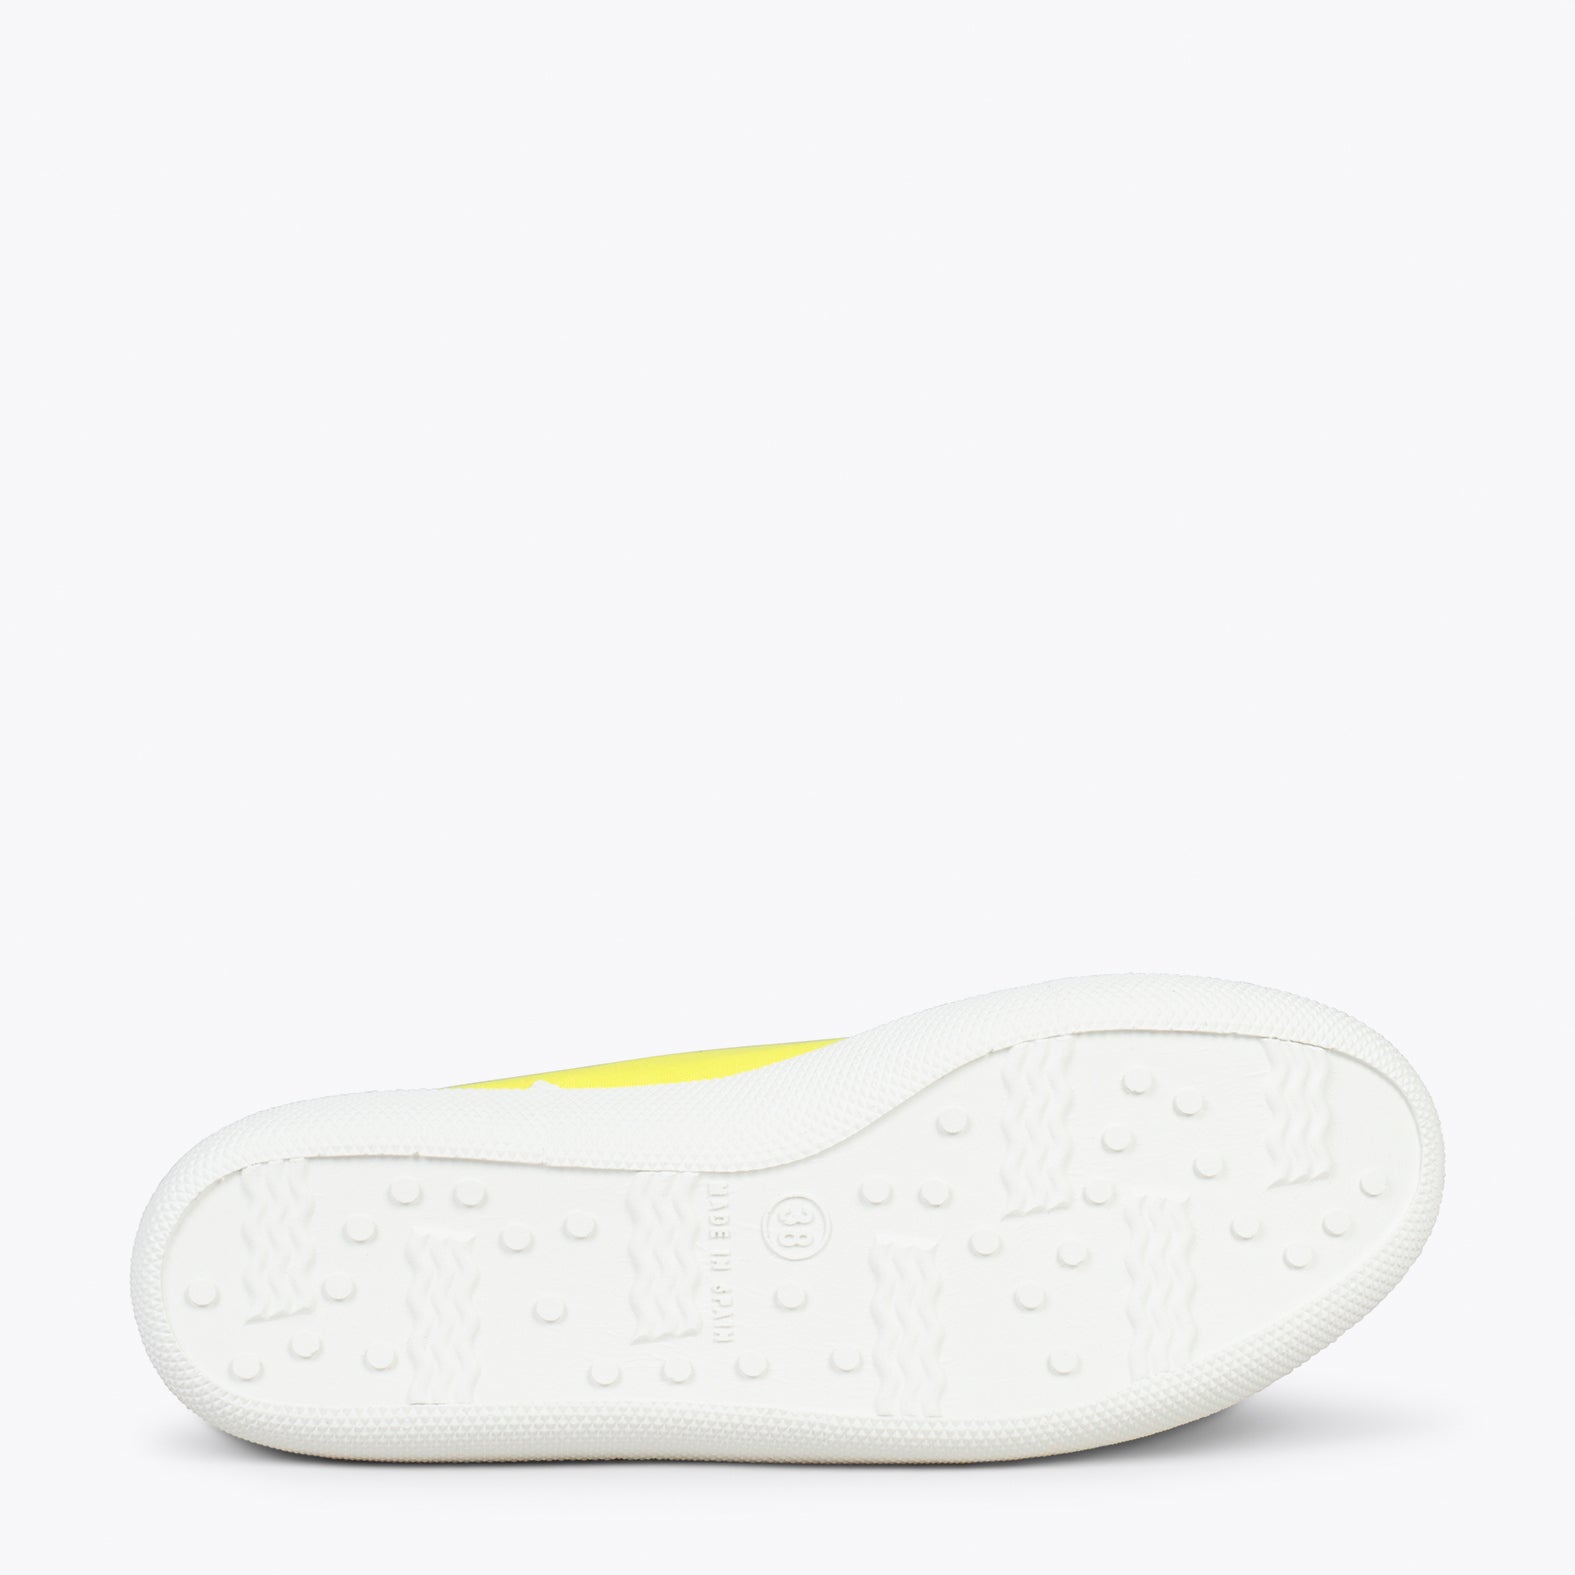 BAOBAB – YELLOW BCI cotton sneakers from IO&GO